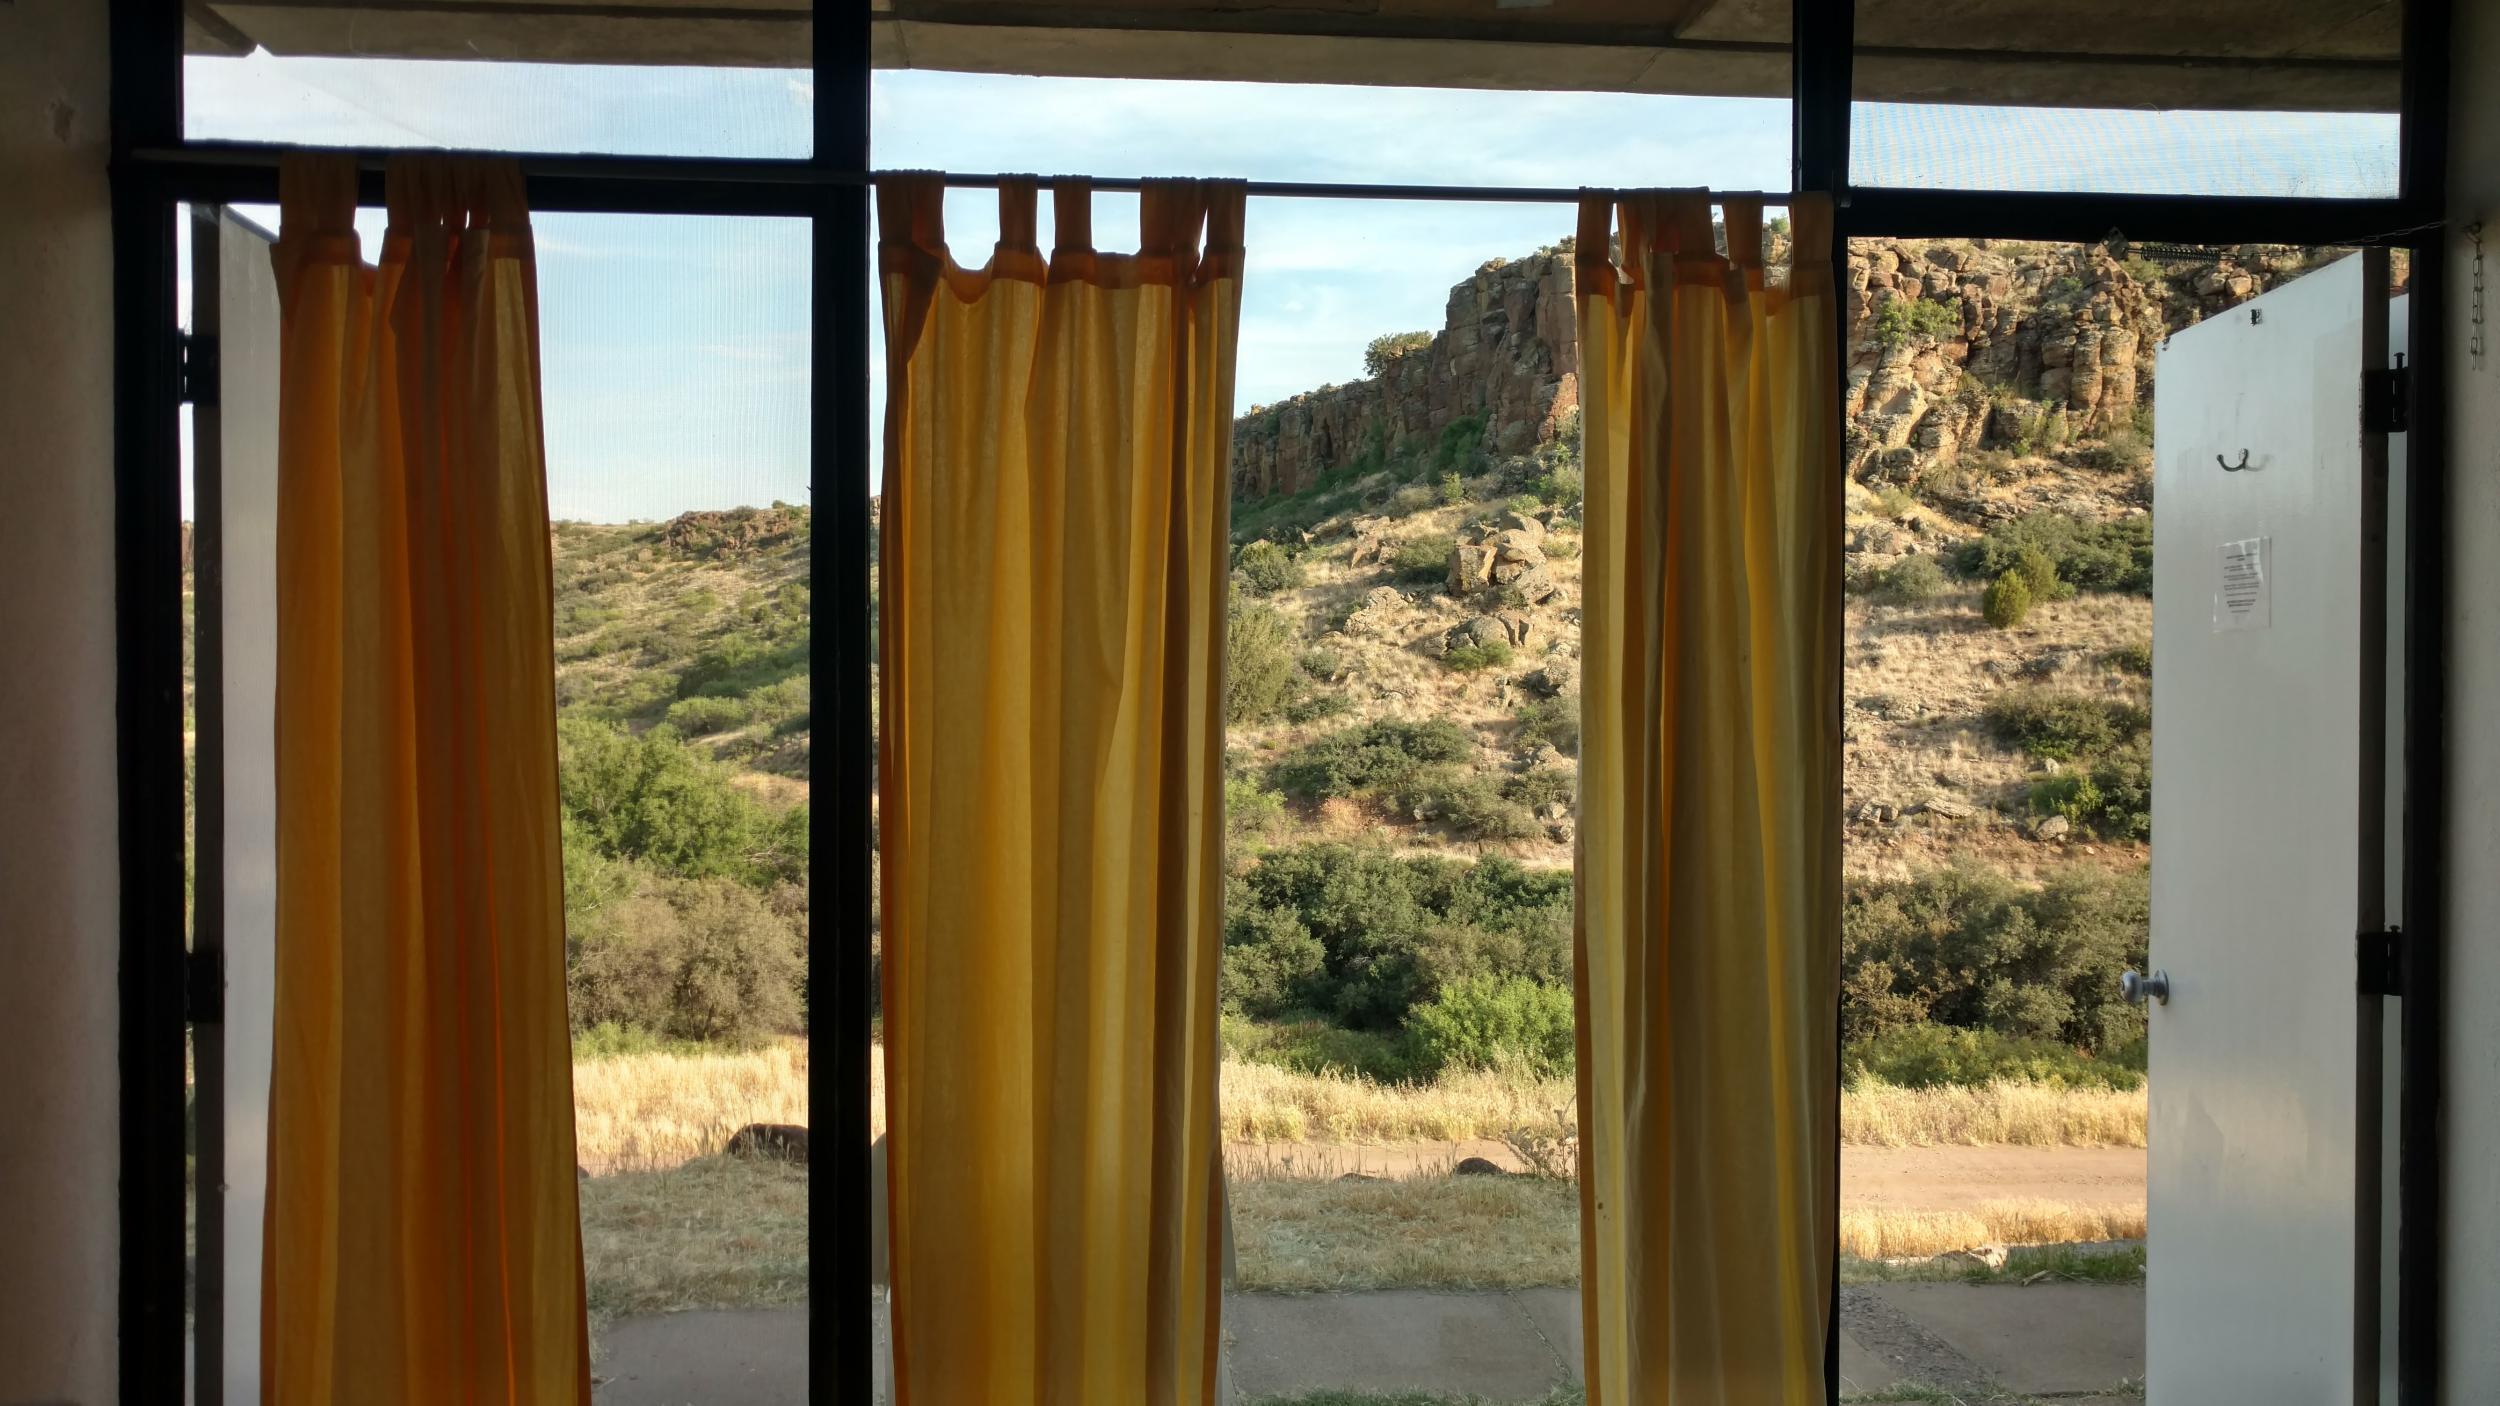 At Arcosanti you're immersed in the landscape